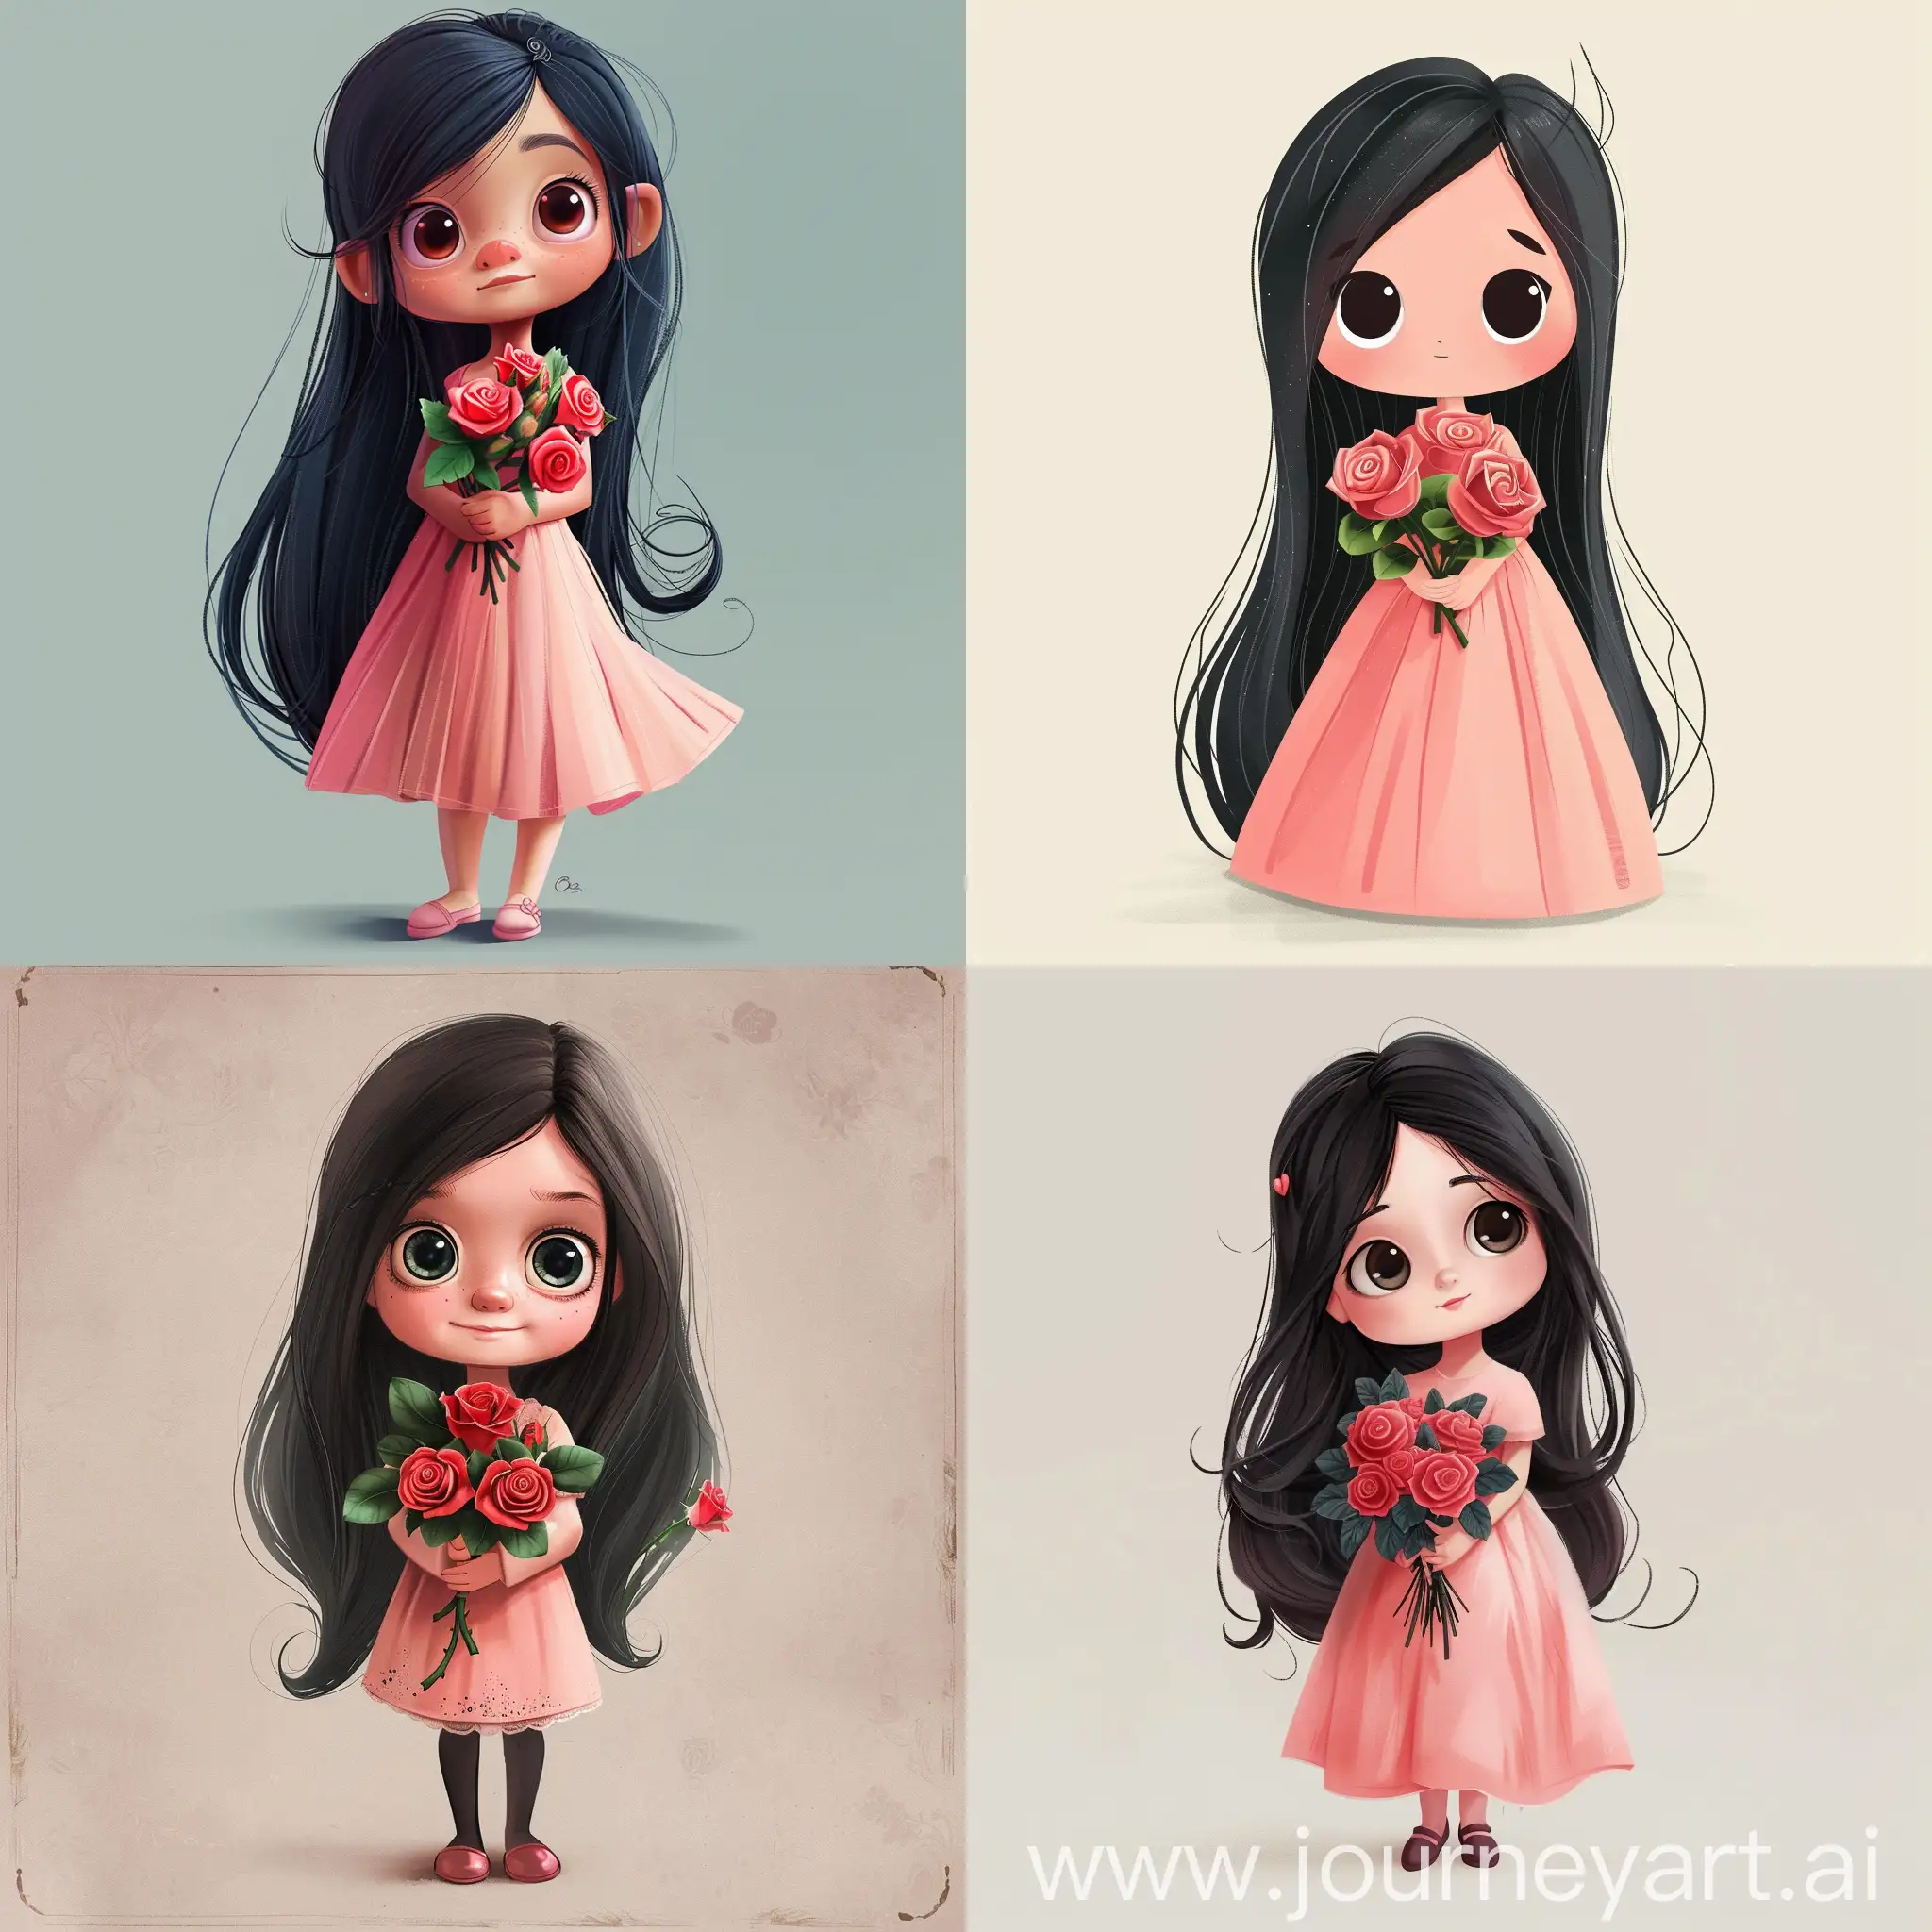 Charming-Little-Girl-Holding-Roses-in-Pink-Dress